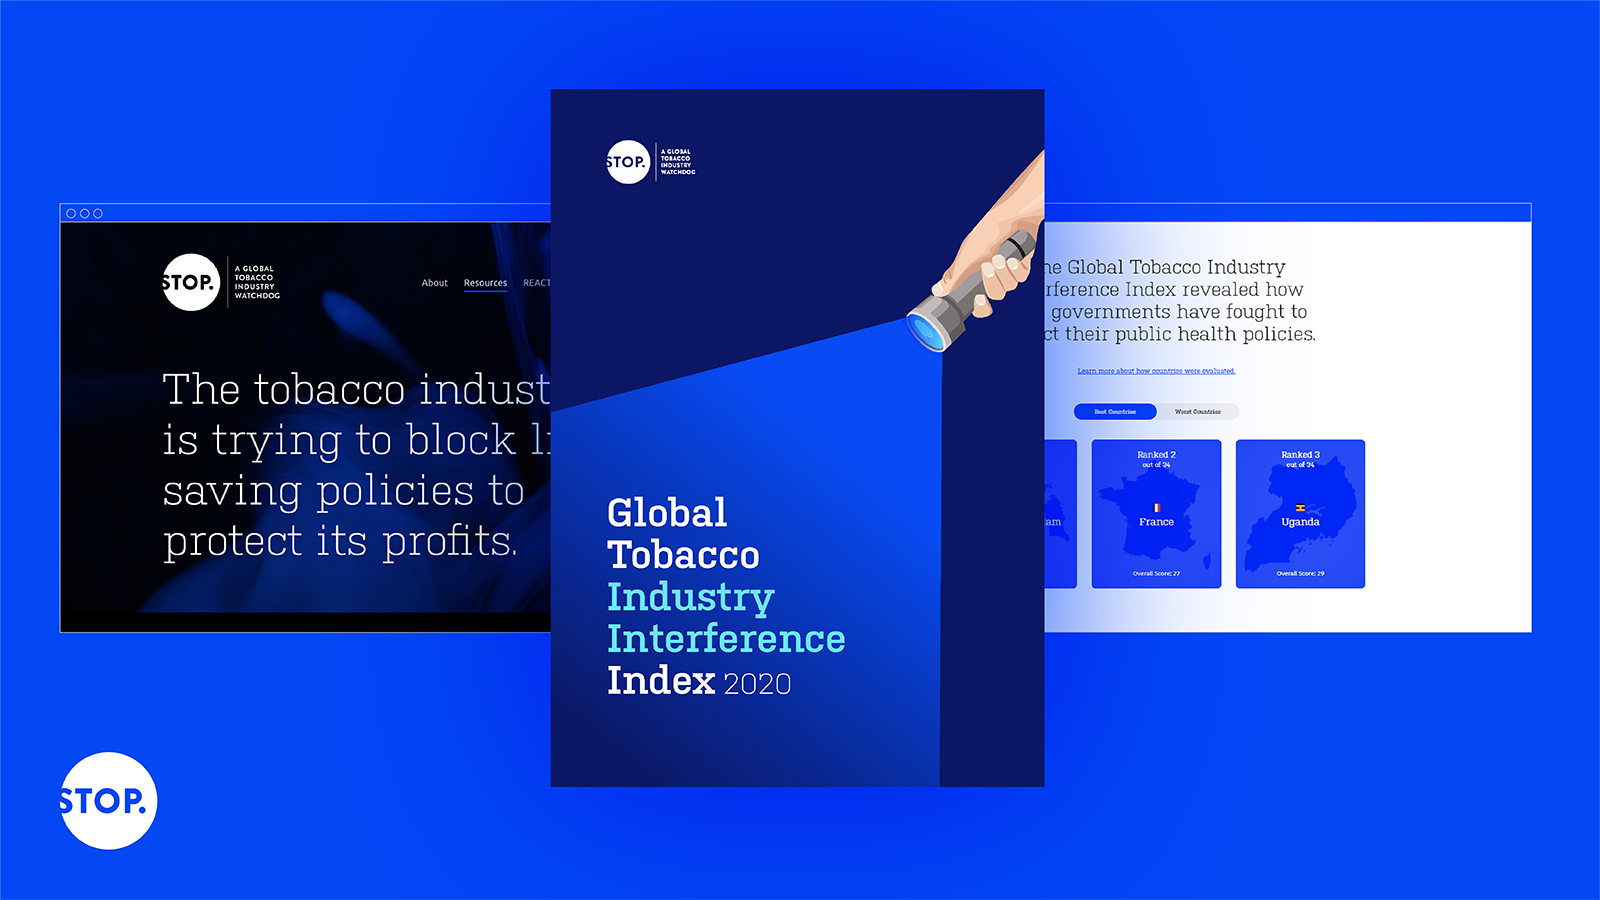 New ‘Global Tobacco Industry Interference Index’ Shows Hope